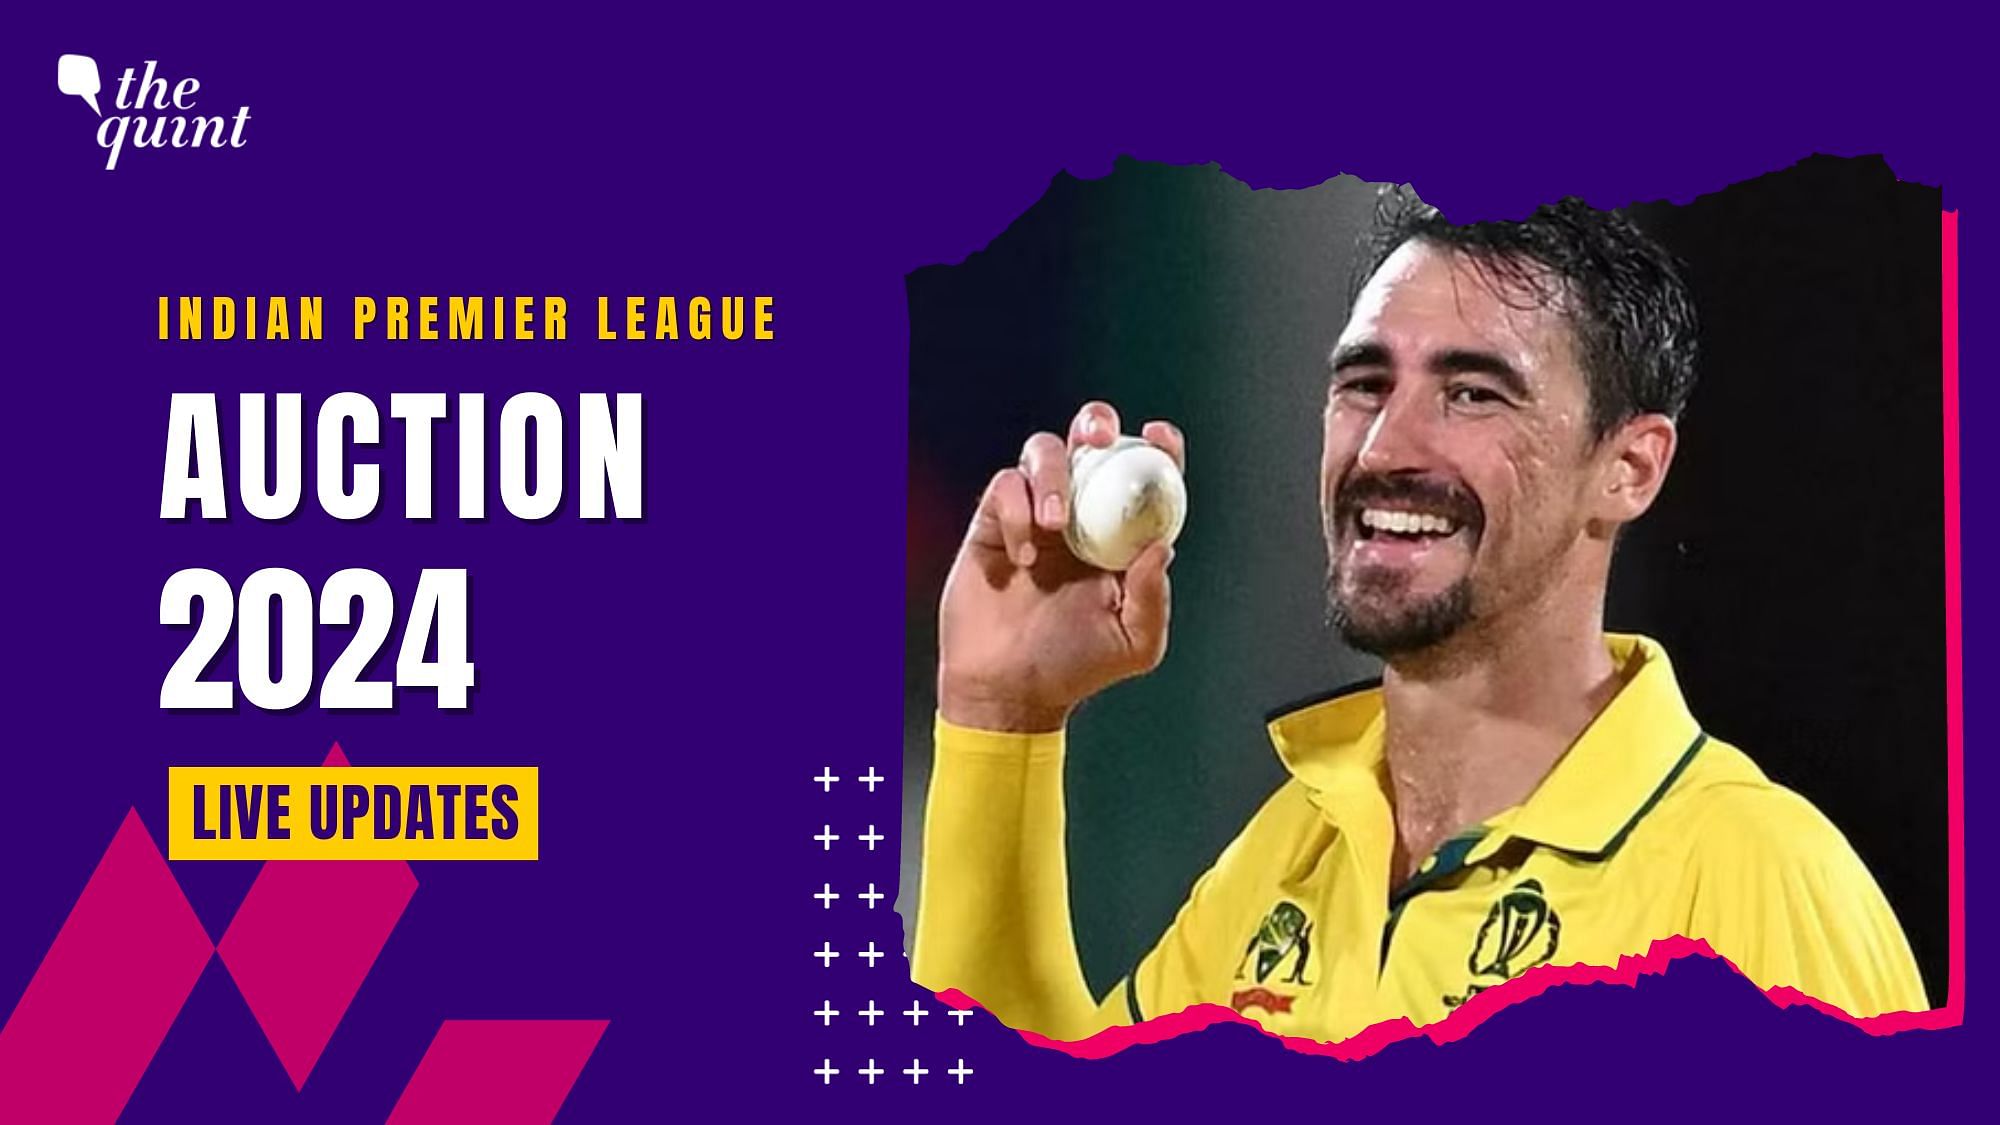 IPL Auction 2024 Highlights 230.45 Crore Spent on 72 Players, Mitchell